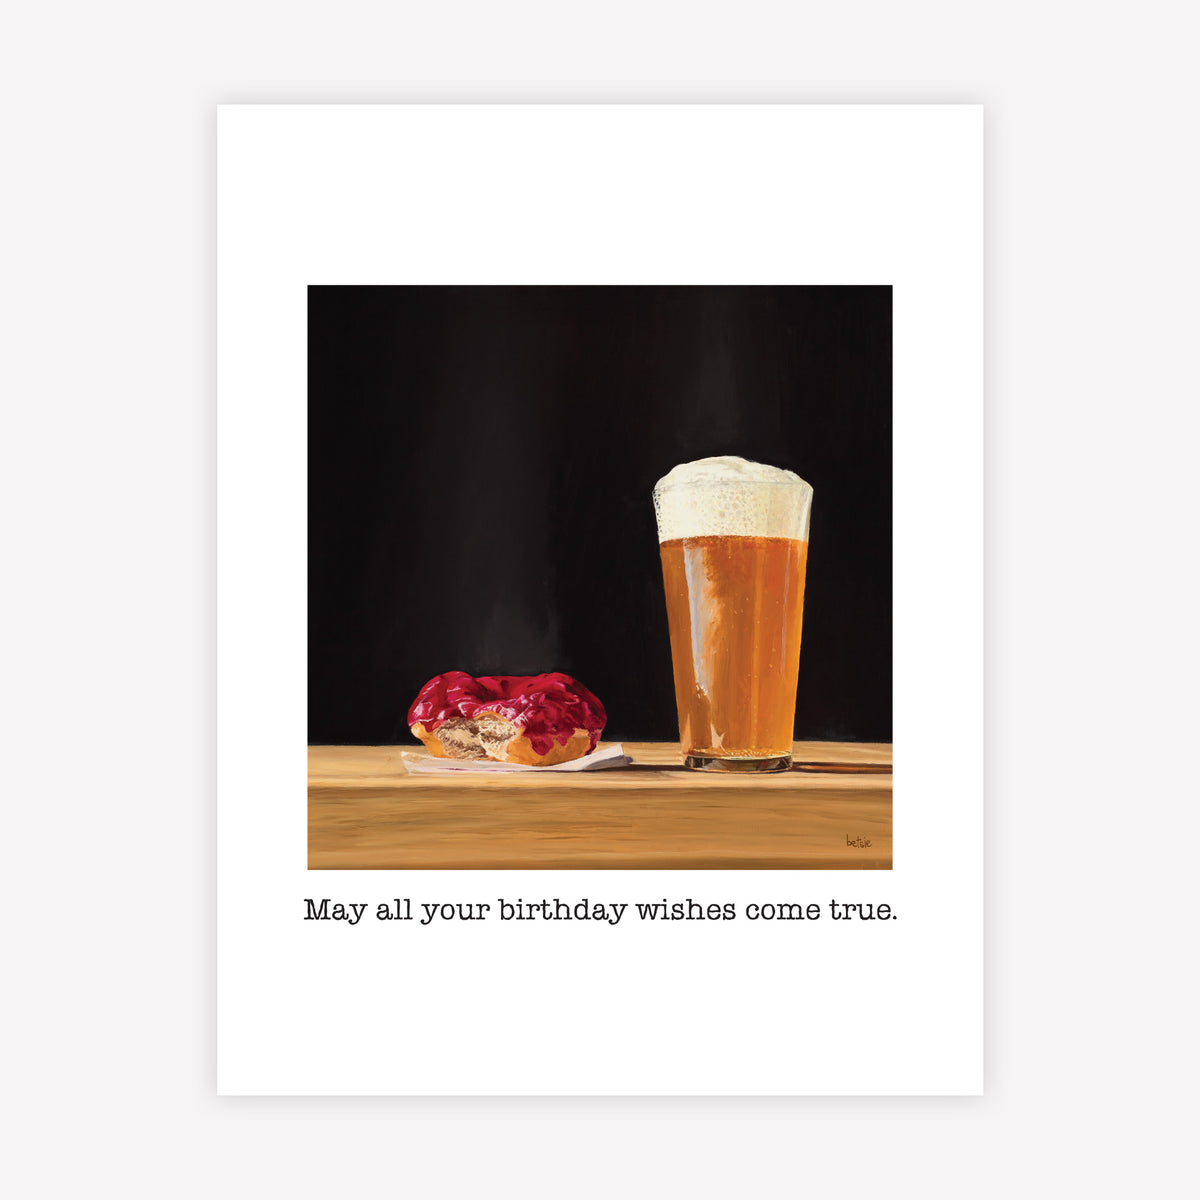 "May all your birthday wishes come true" Greeting Card